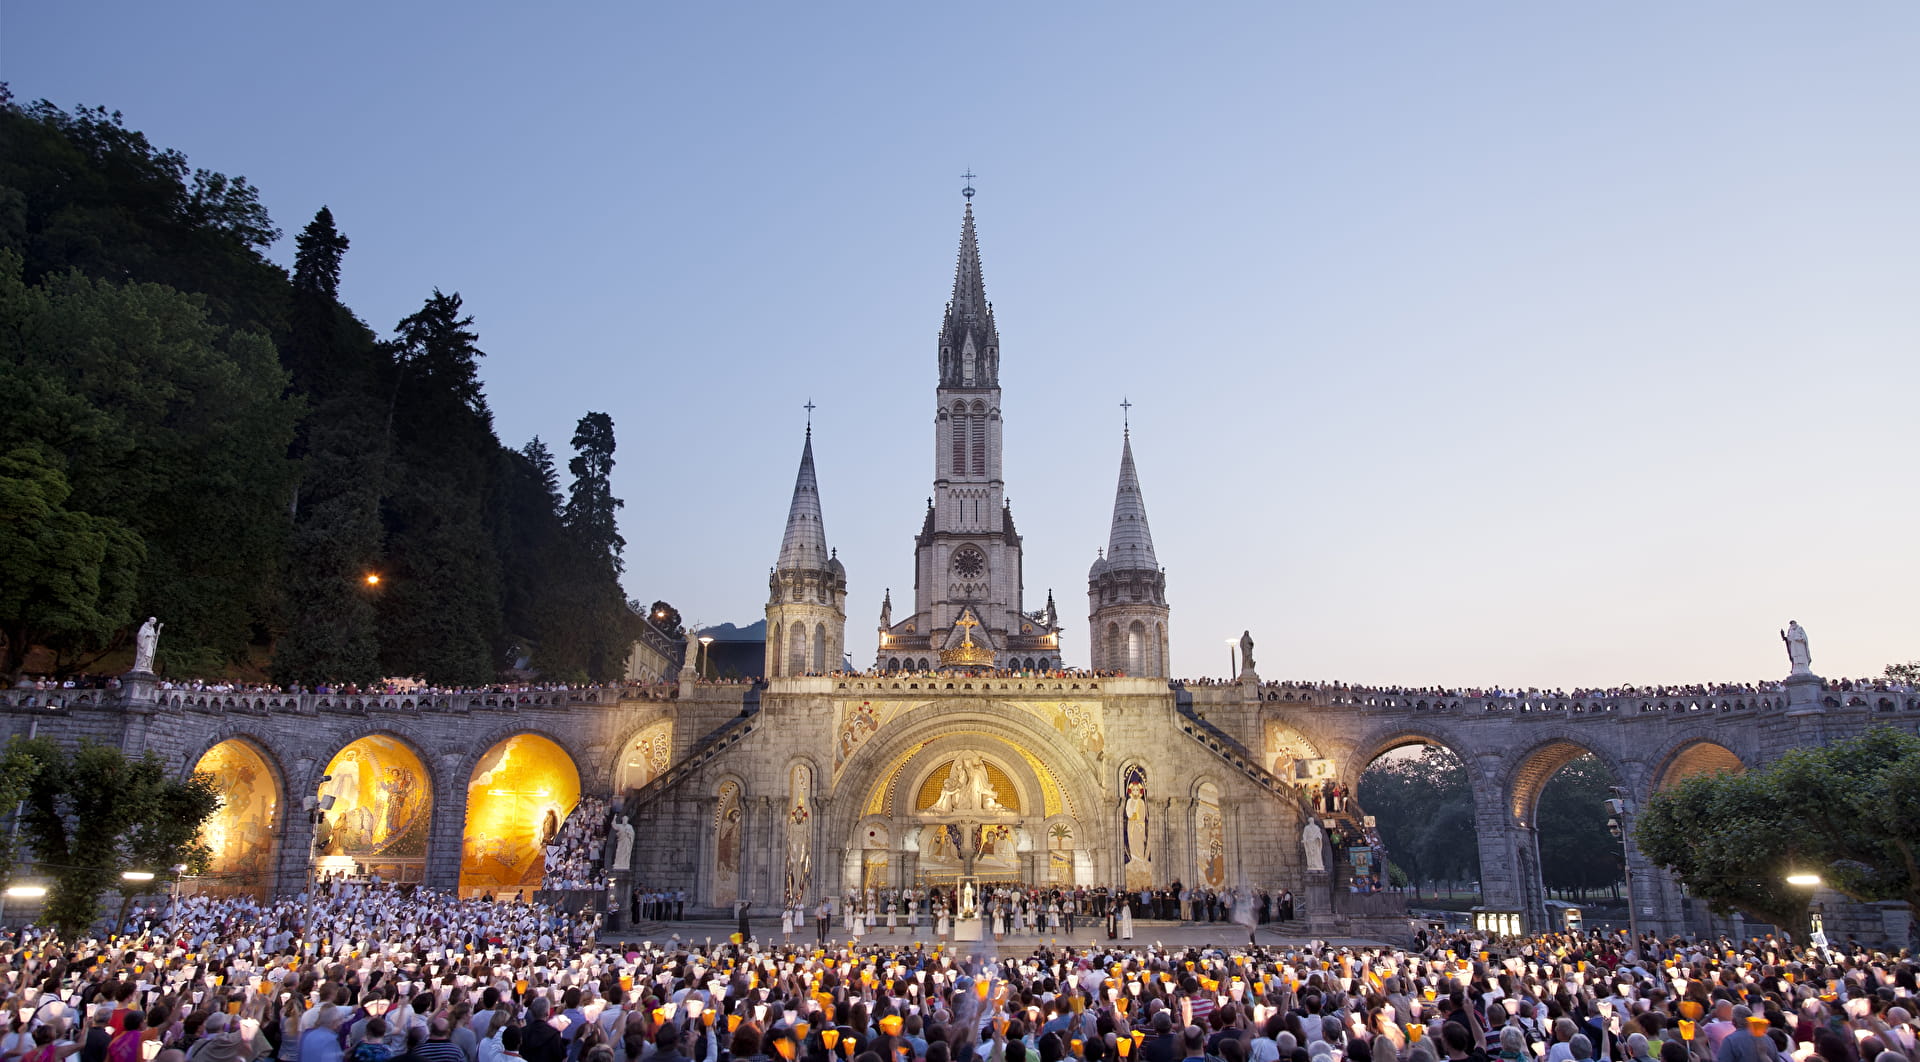 Torchlight procession at the Sanctuary of Lourdes in the Pyrenees